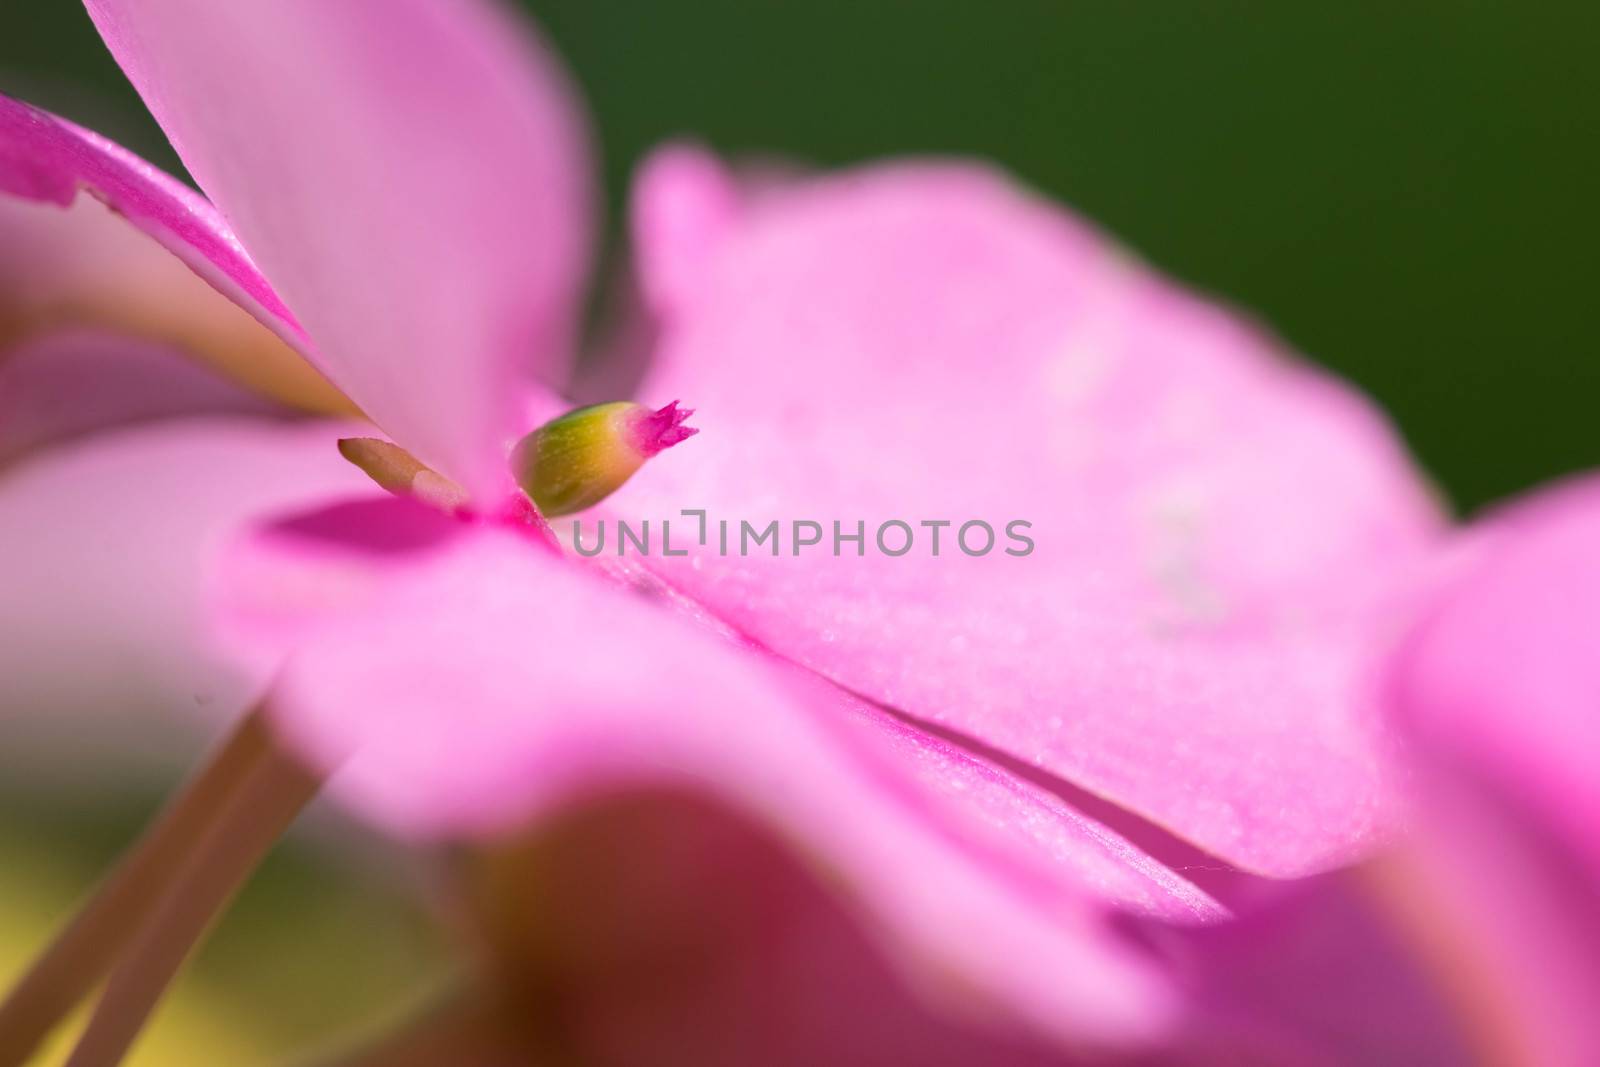 Pink flower in very high detail.a symbol of simplicity and love